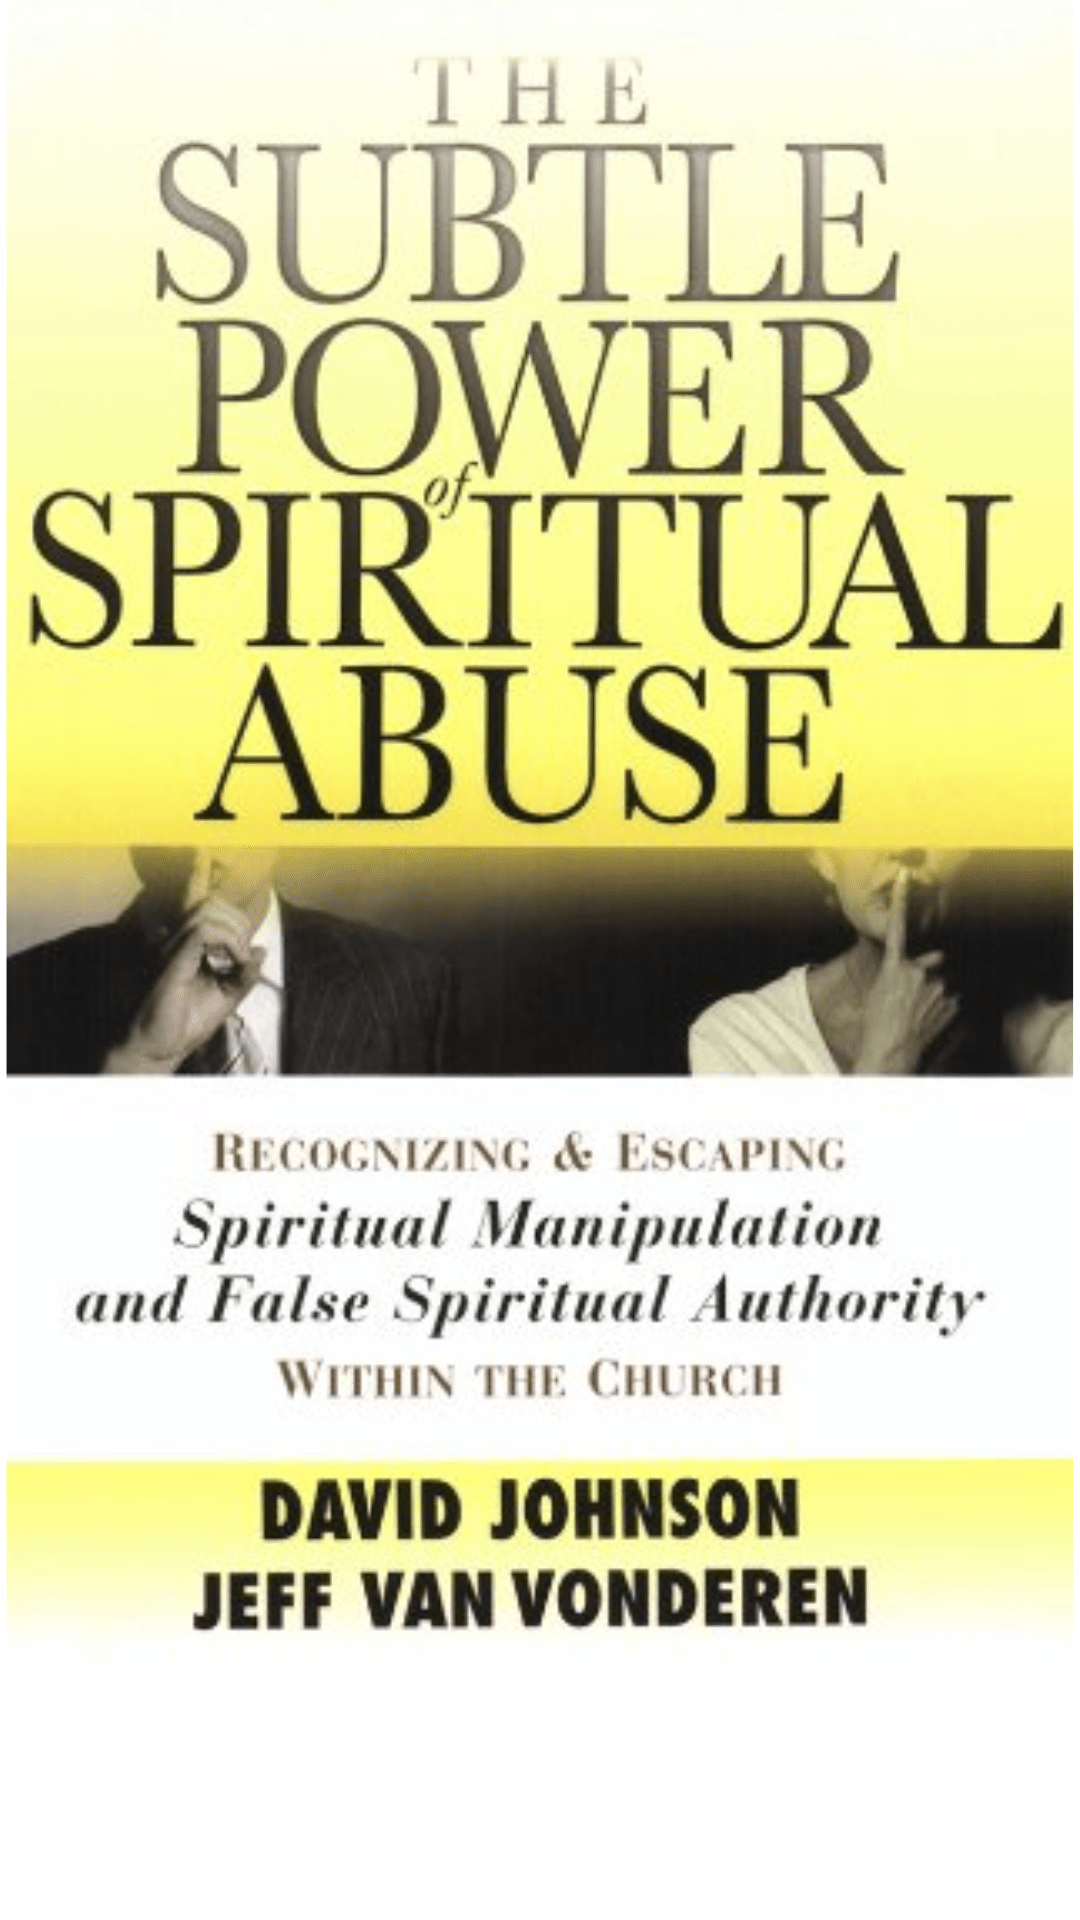 The Subtle Power of Spiritual Abuse - Recognizing and Escaping spiritual Manipulation and False Spiritual Authority Within the Church